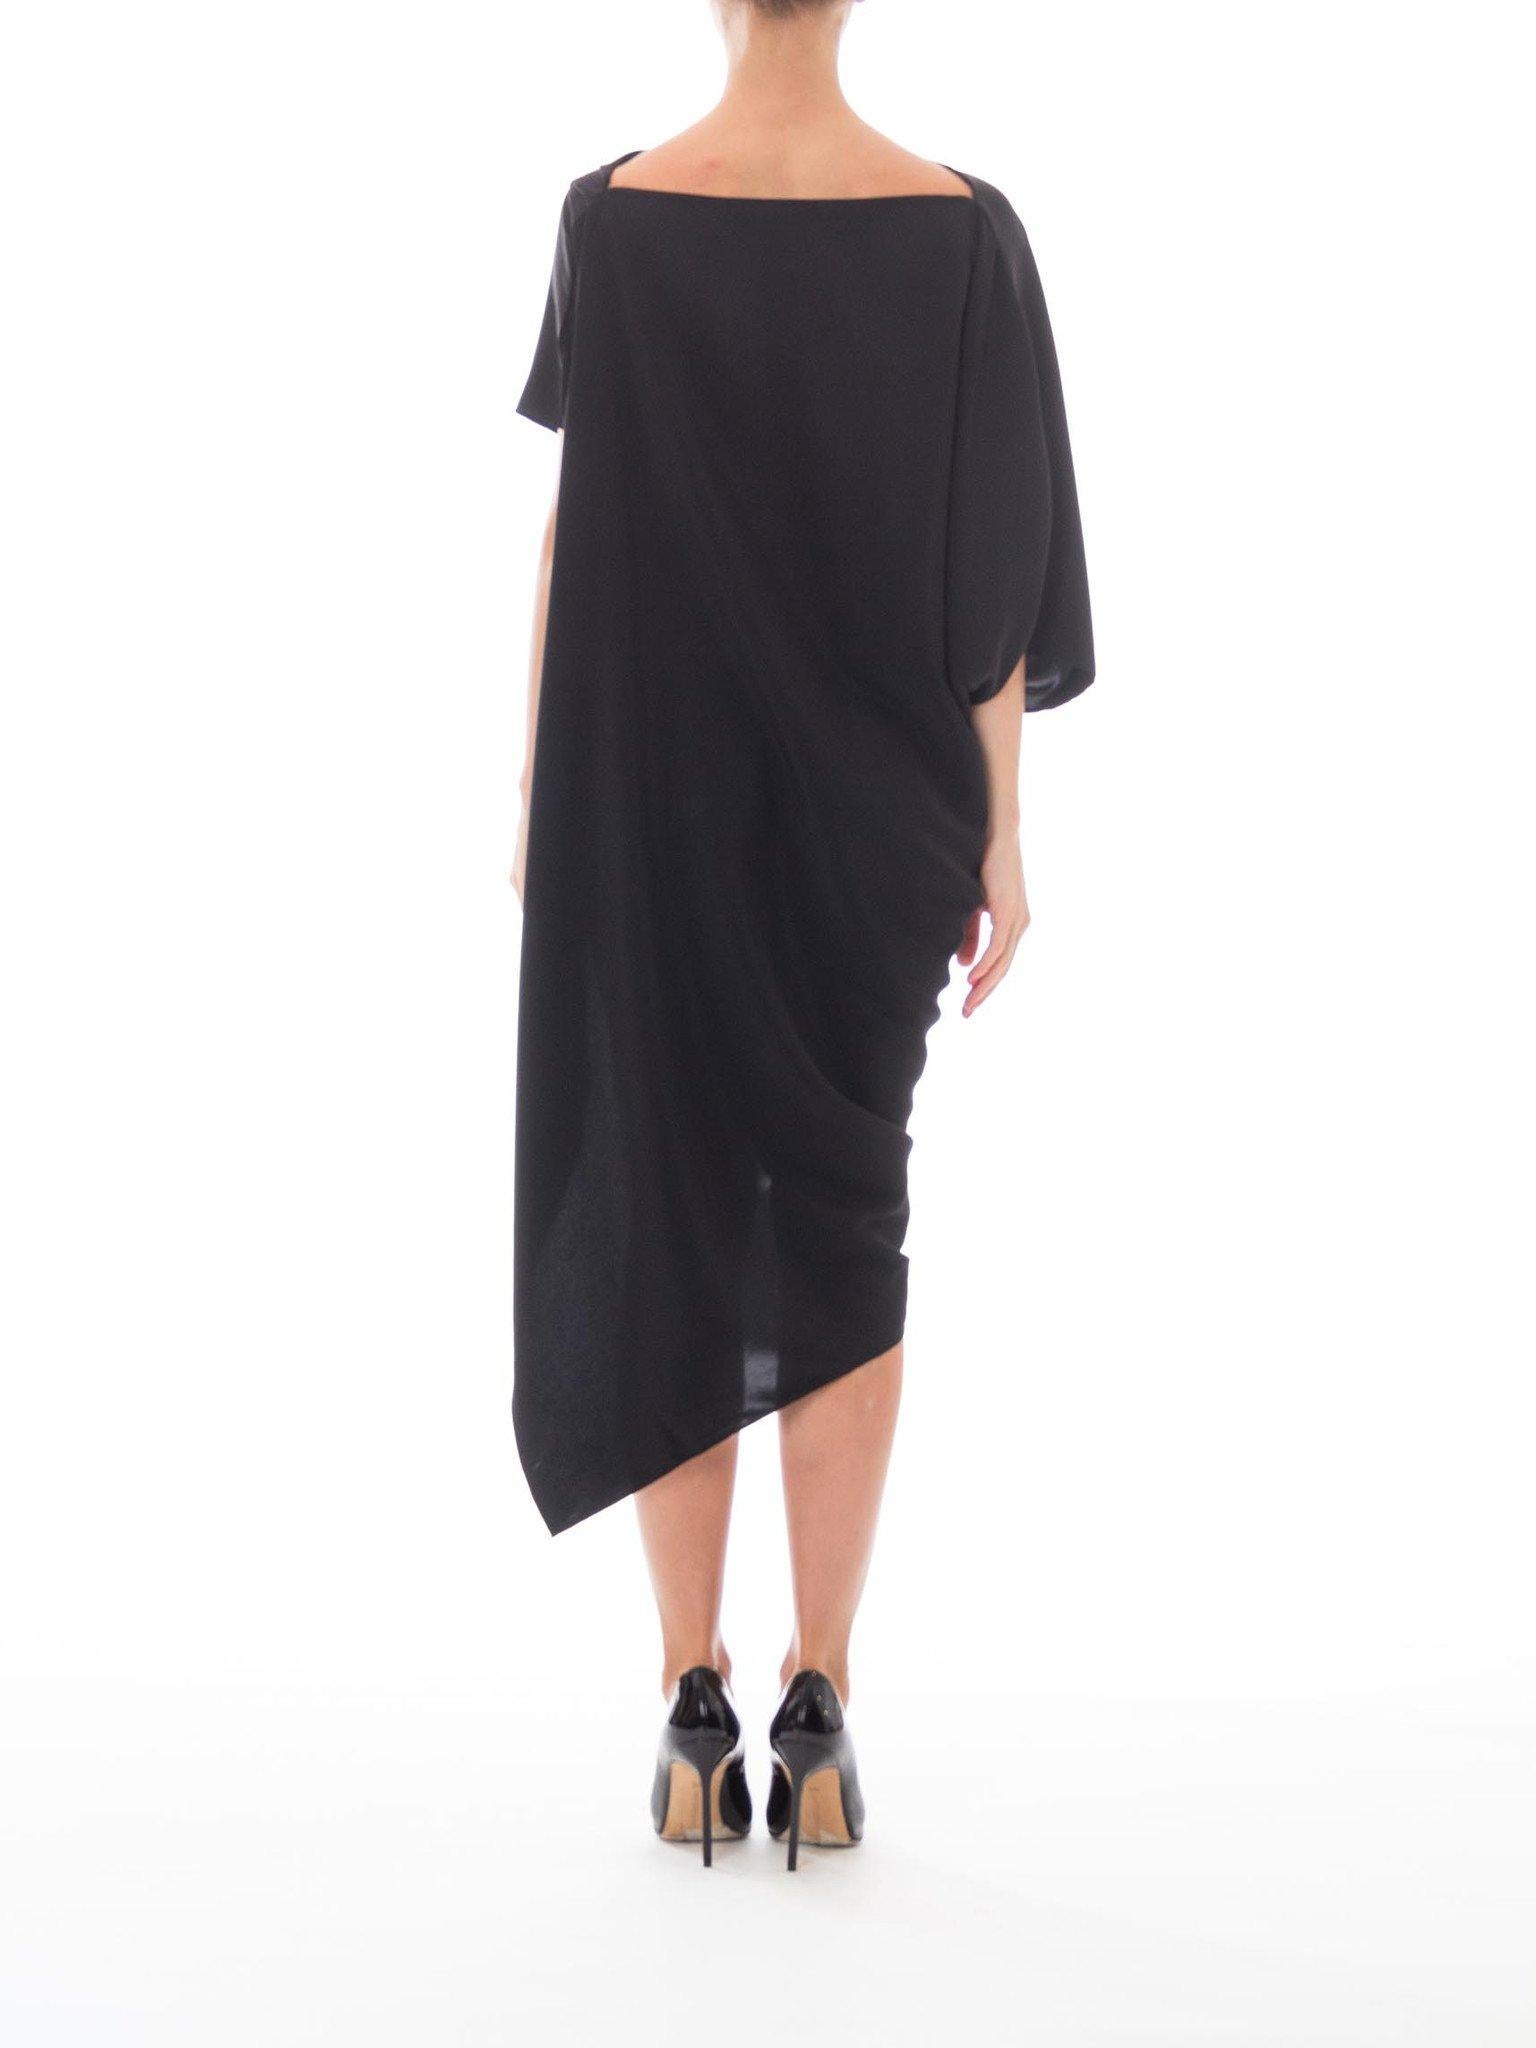 Original Design Avant-Garde 1990S Style Black Silk Charmeause Draped Minimalist Asymmetrical Hem
MORPHEW COLLECTION is made entirely by hand in our NYC Ateliér of rare antique materials sourced from around the globe. Our sustainable vintage